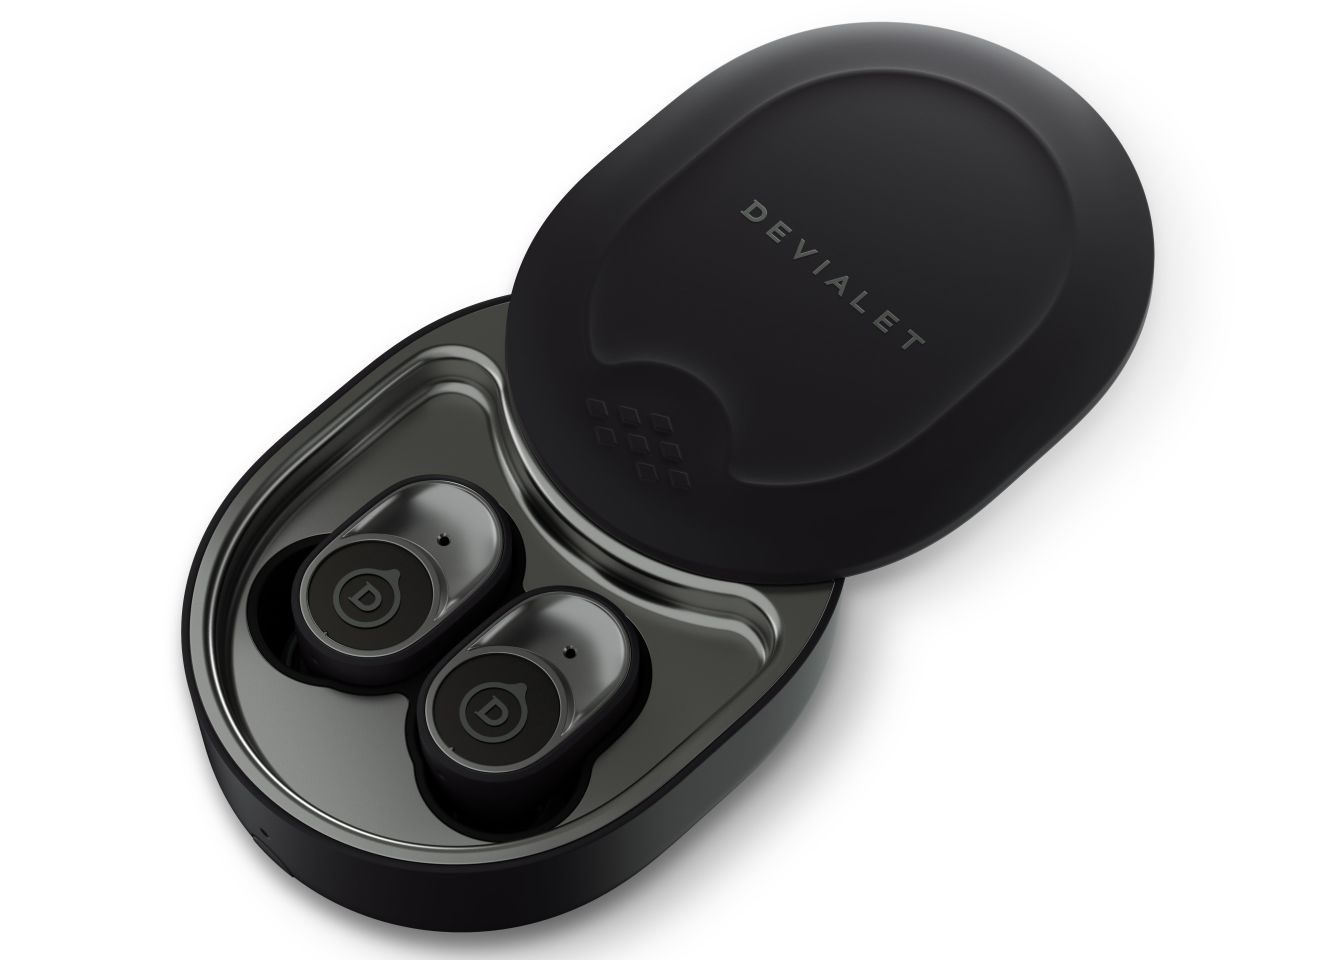 The Qi charging case provides 3.5 full charges for the Gemini earphones